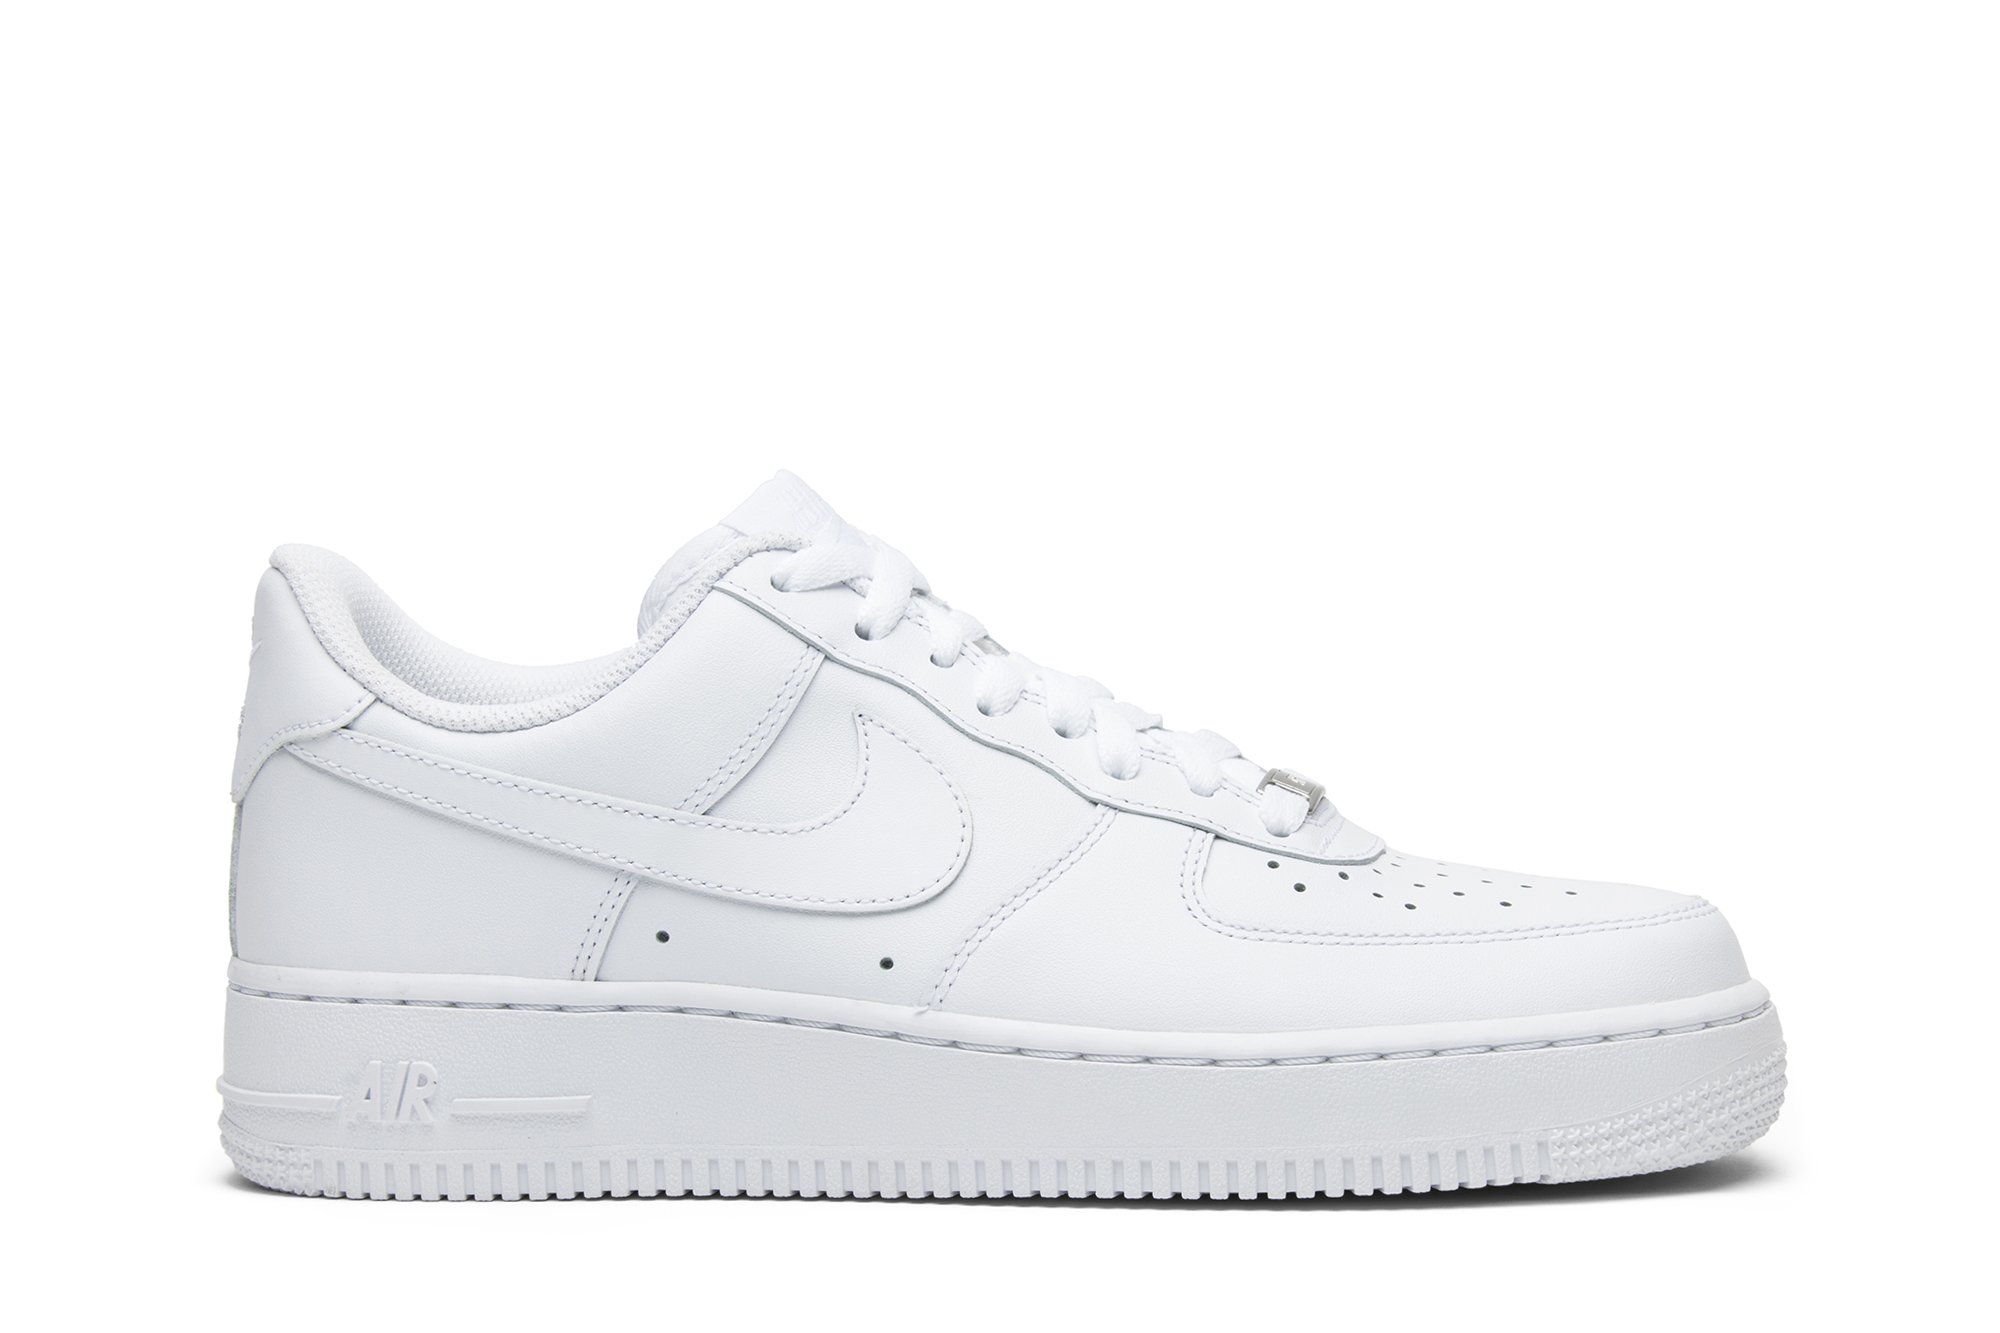 Buy Air Force 1 '07 'White' - 315122 111 | GOAT